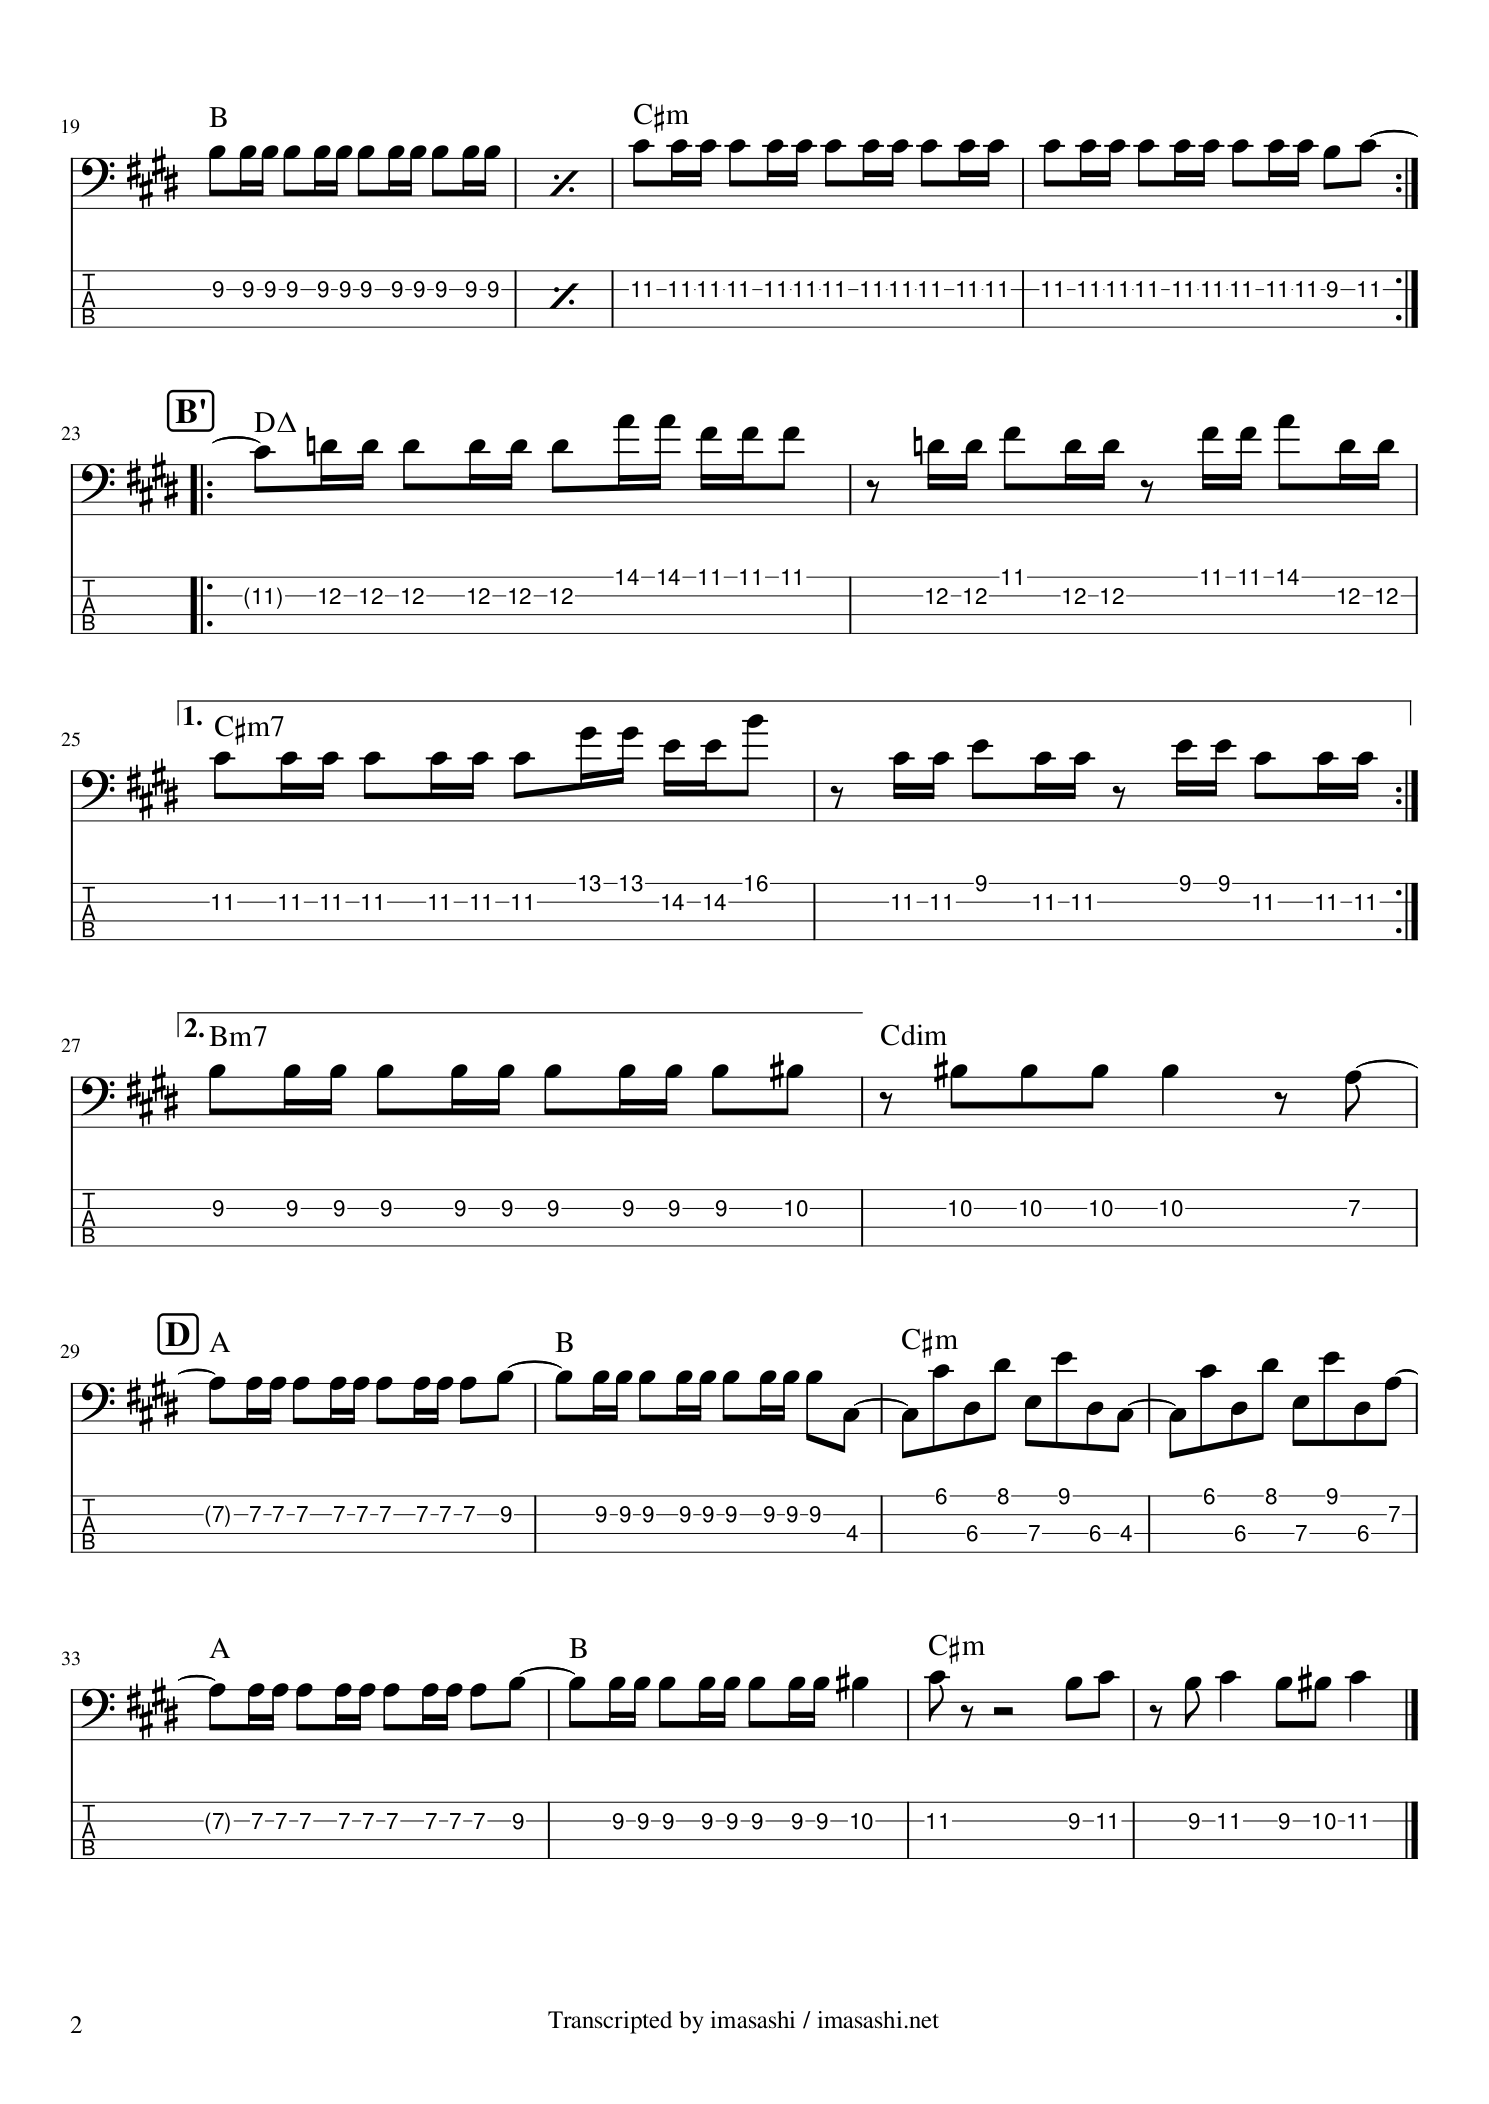 Dr. Wily Stage 1 BGM bass tab 2